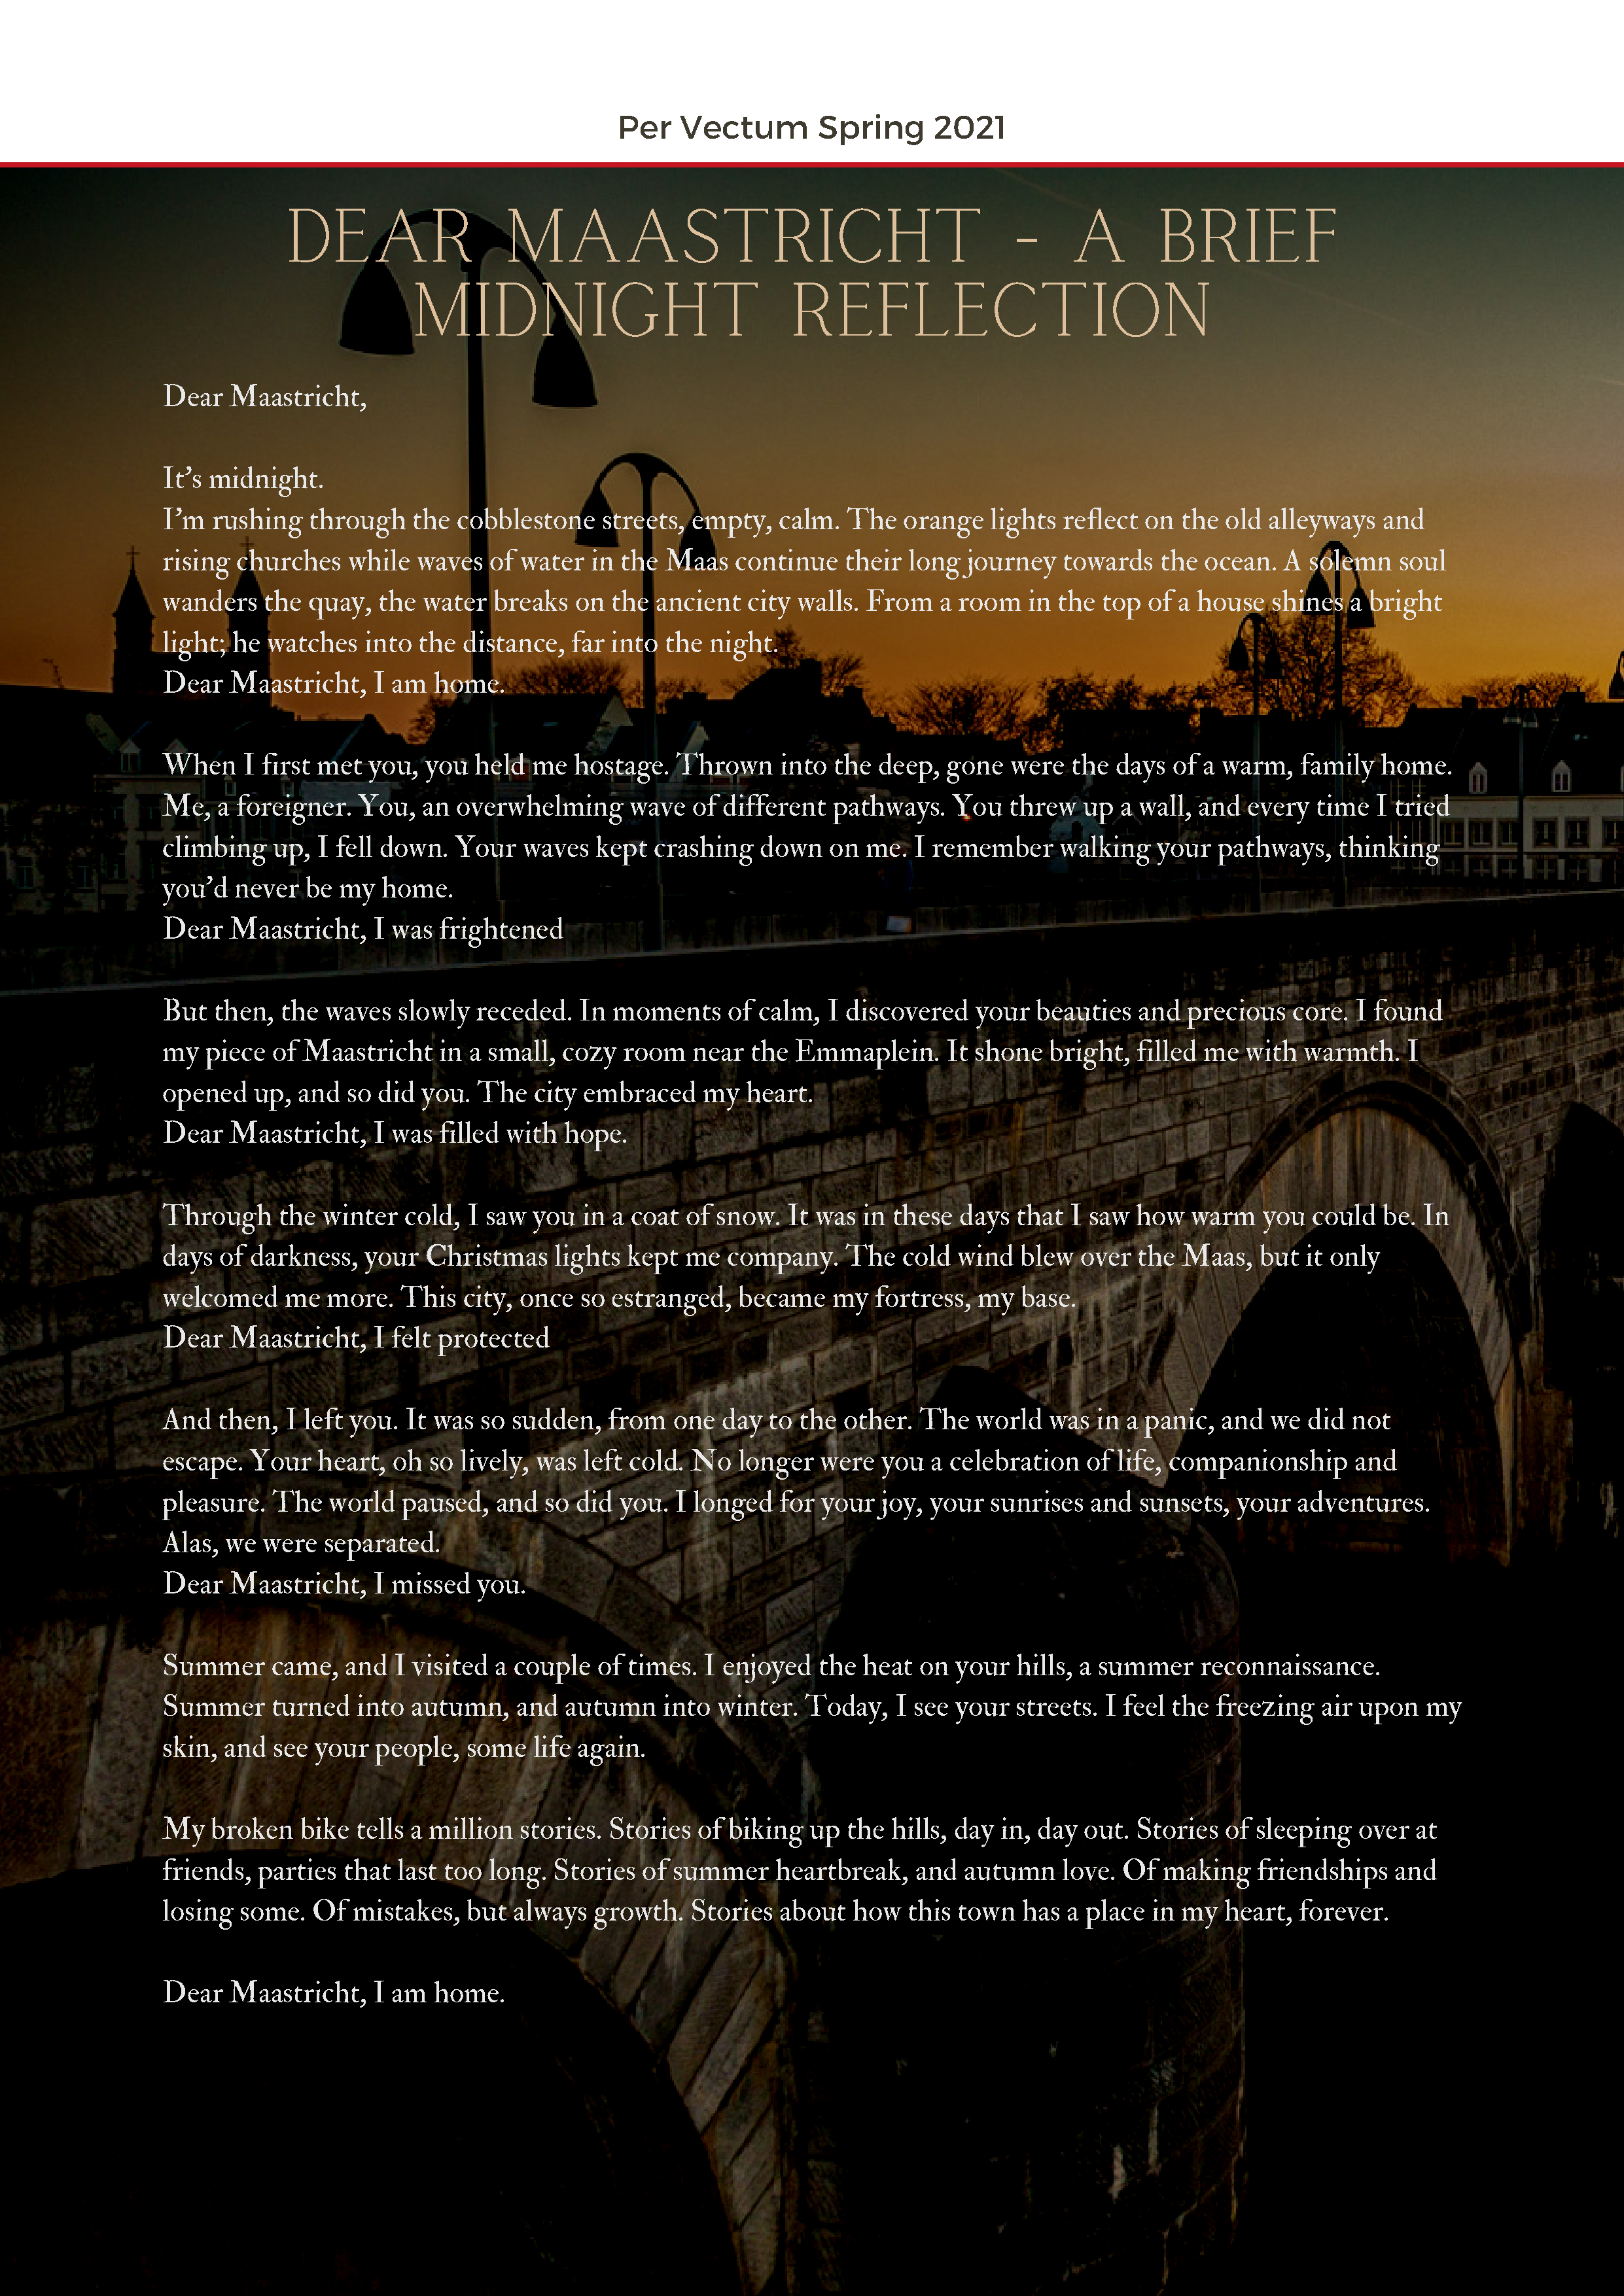 Per Vectum Spring edition 2021 (1)_Page_18.png